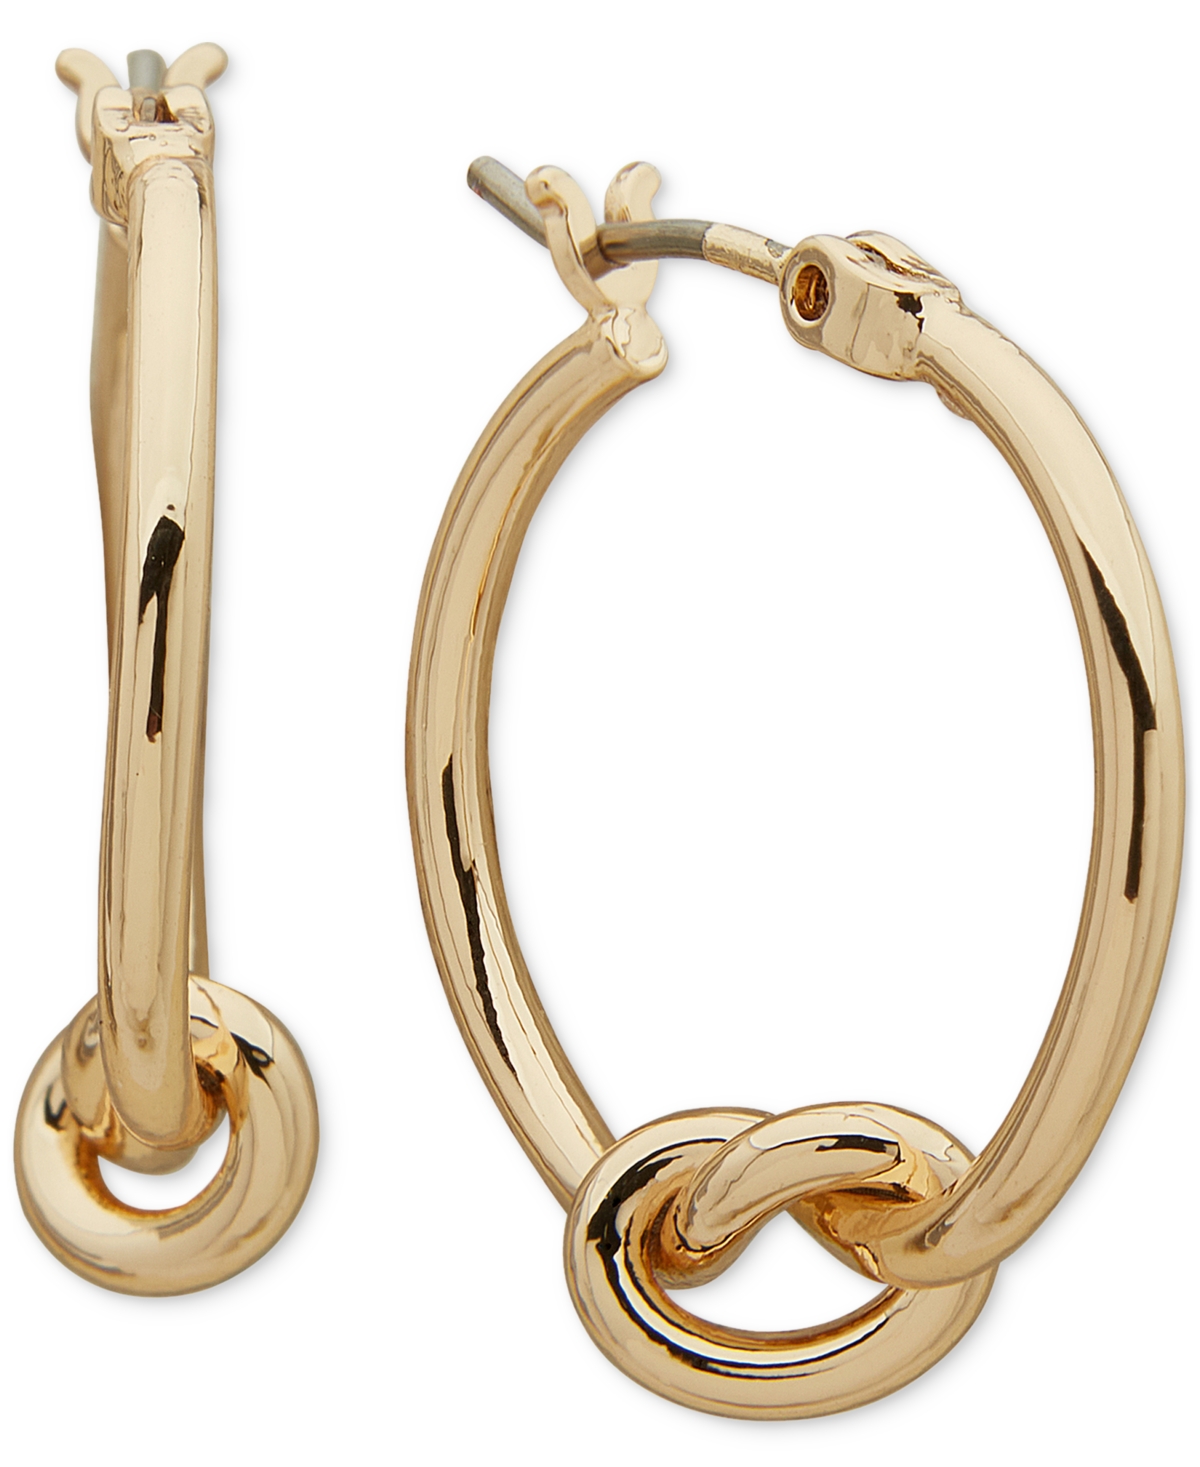 Dkny Small Bottom Knotted Modern Hoop Earrings In Gold